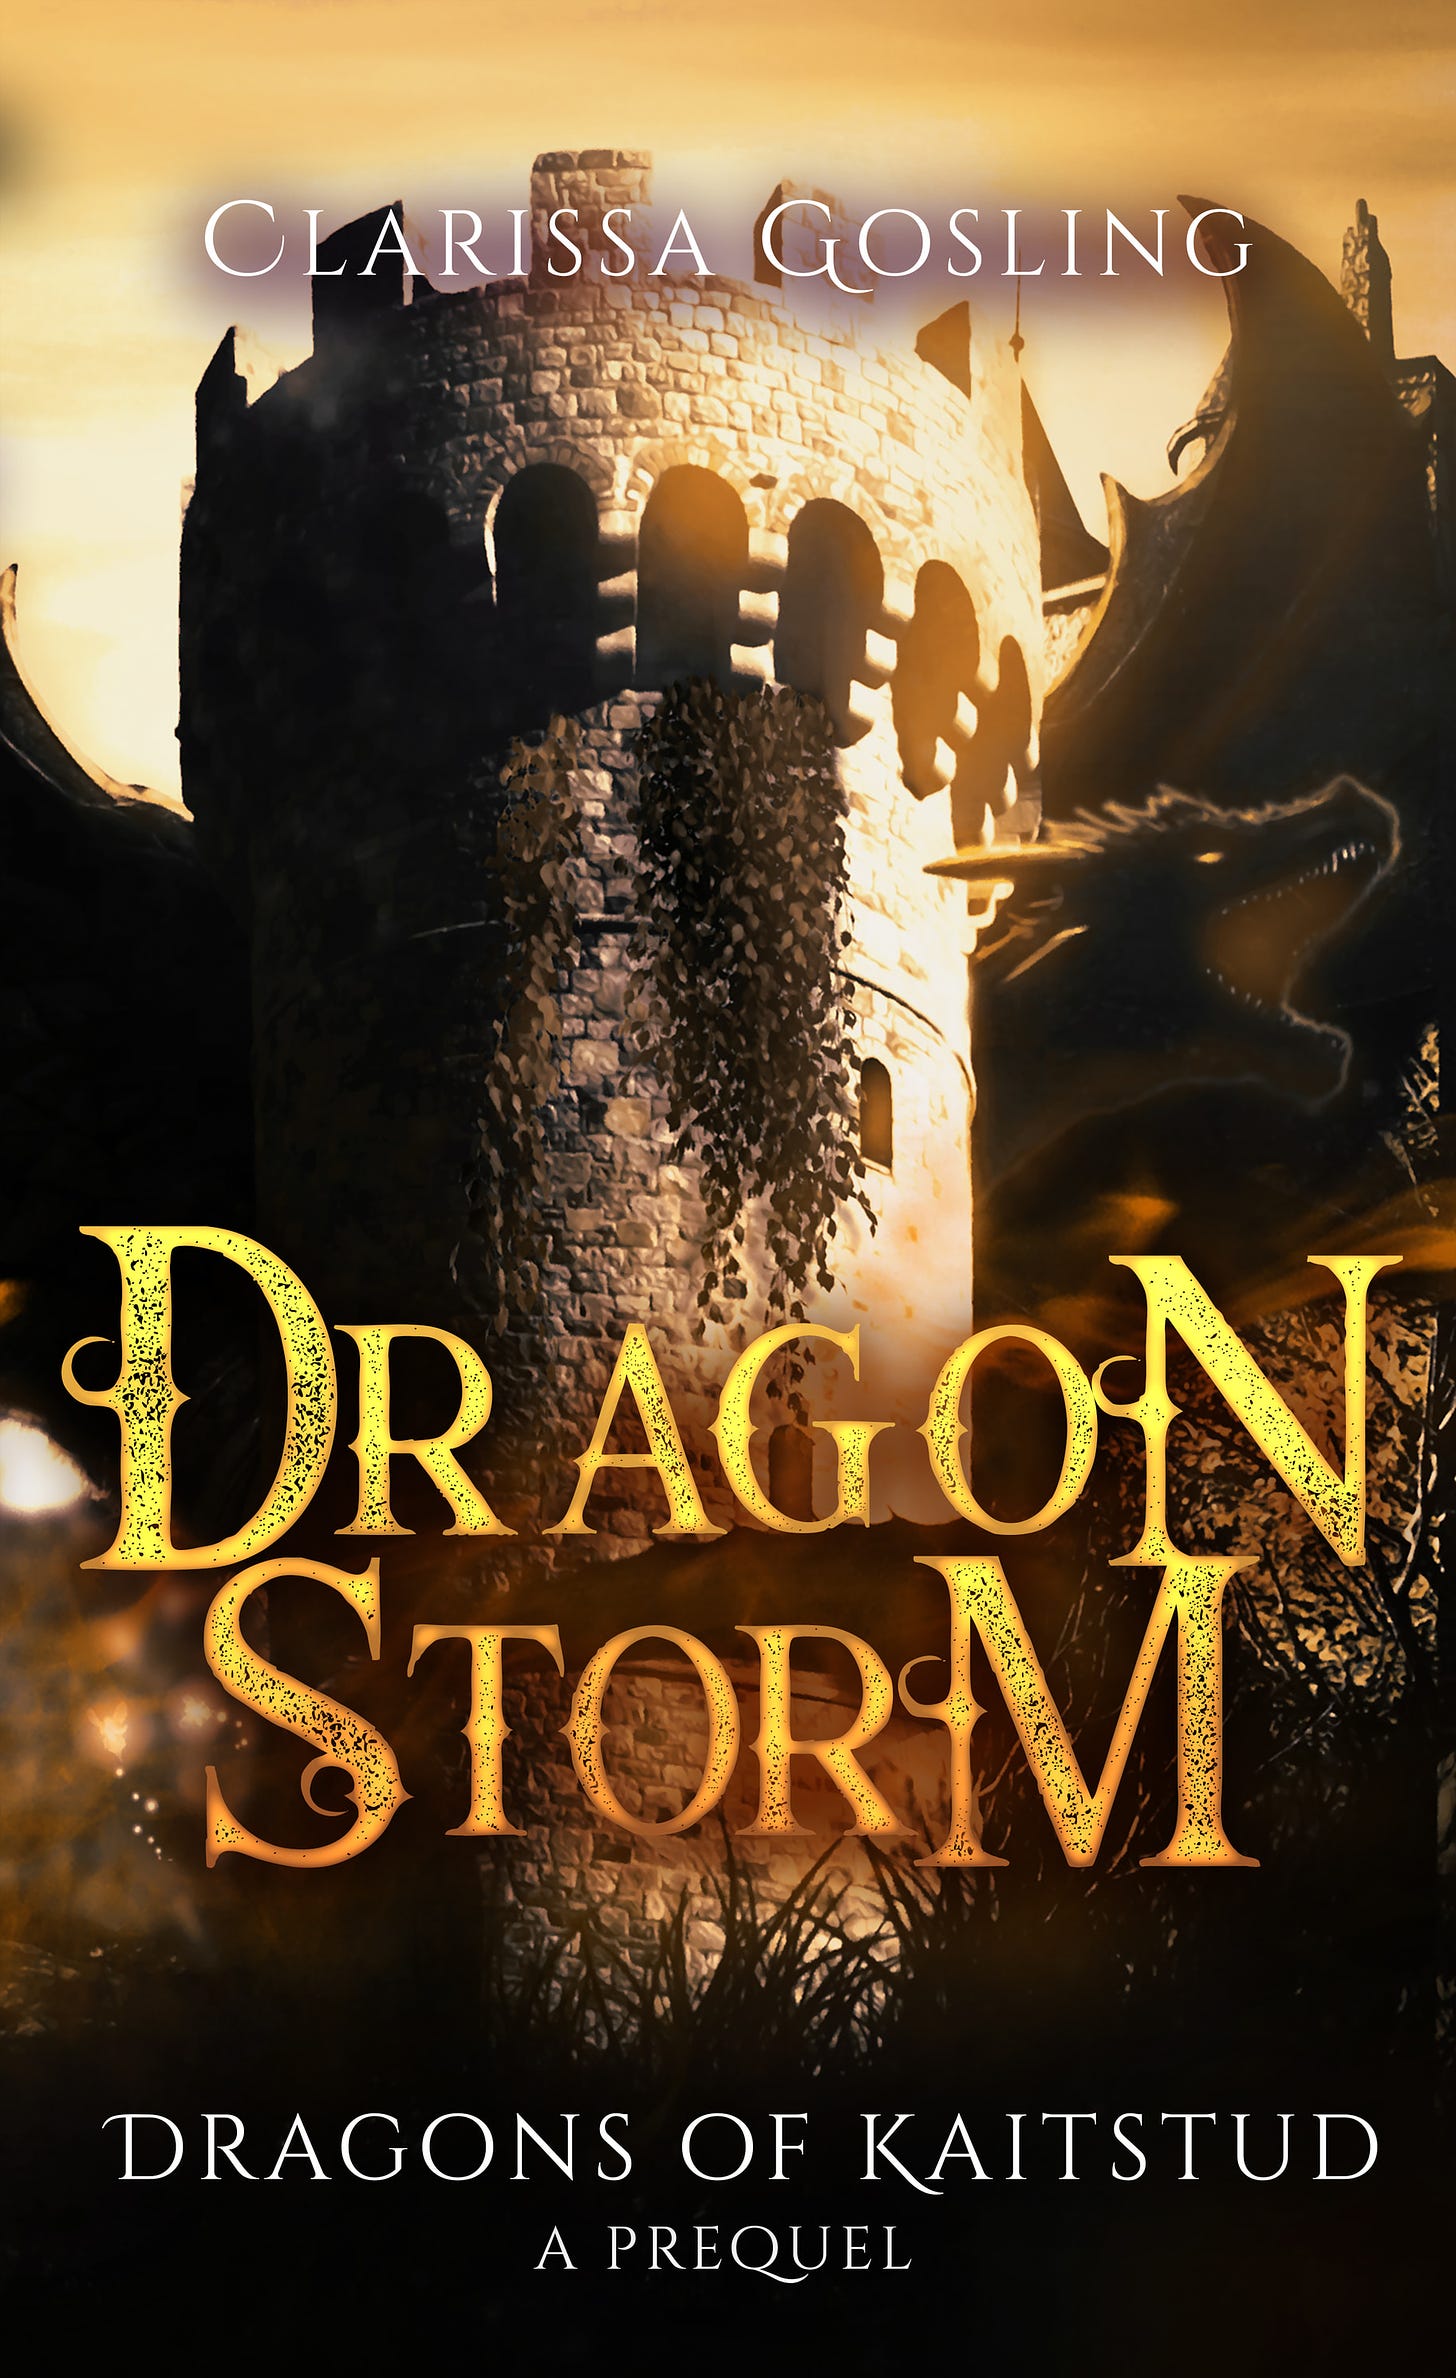 Dragon Storm book cover by Clarissa Gosling